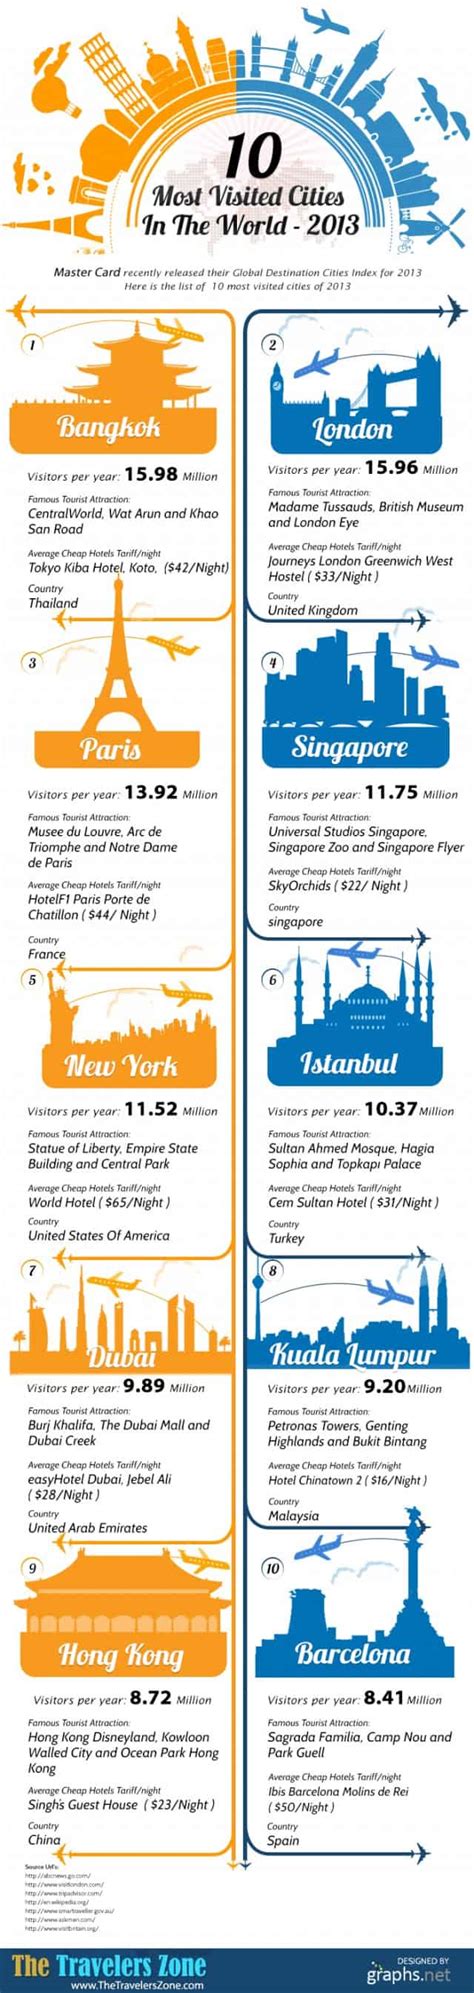 10 Most Visited Cities In The World Daily Infographic